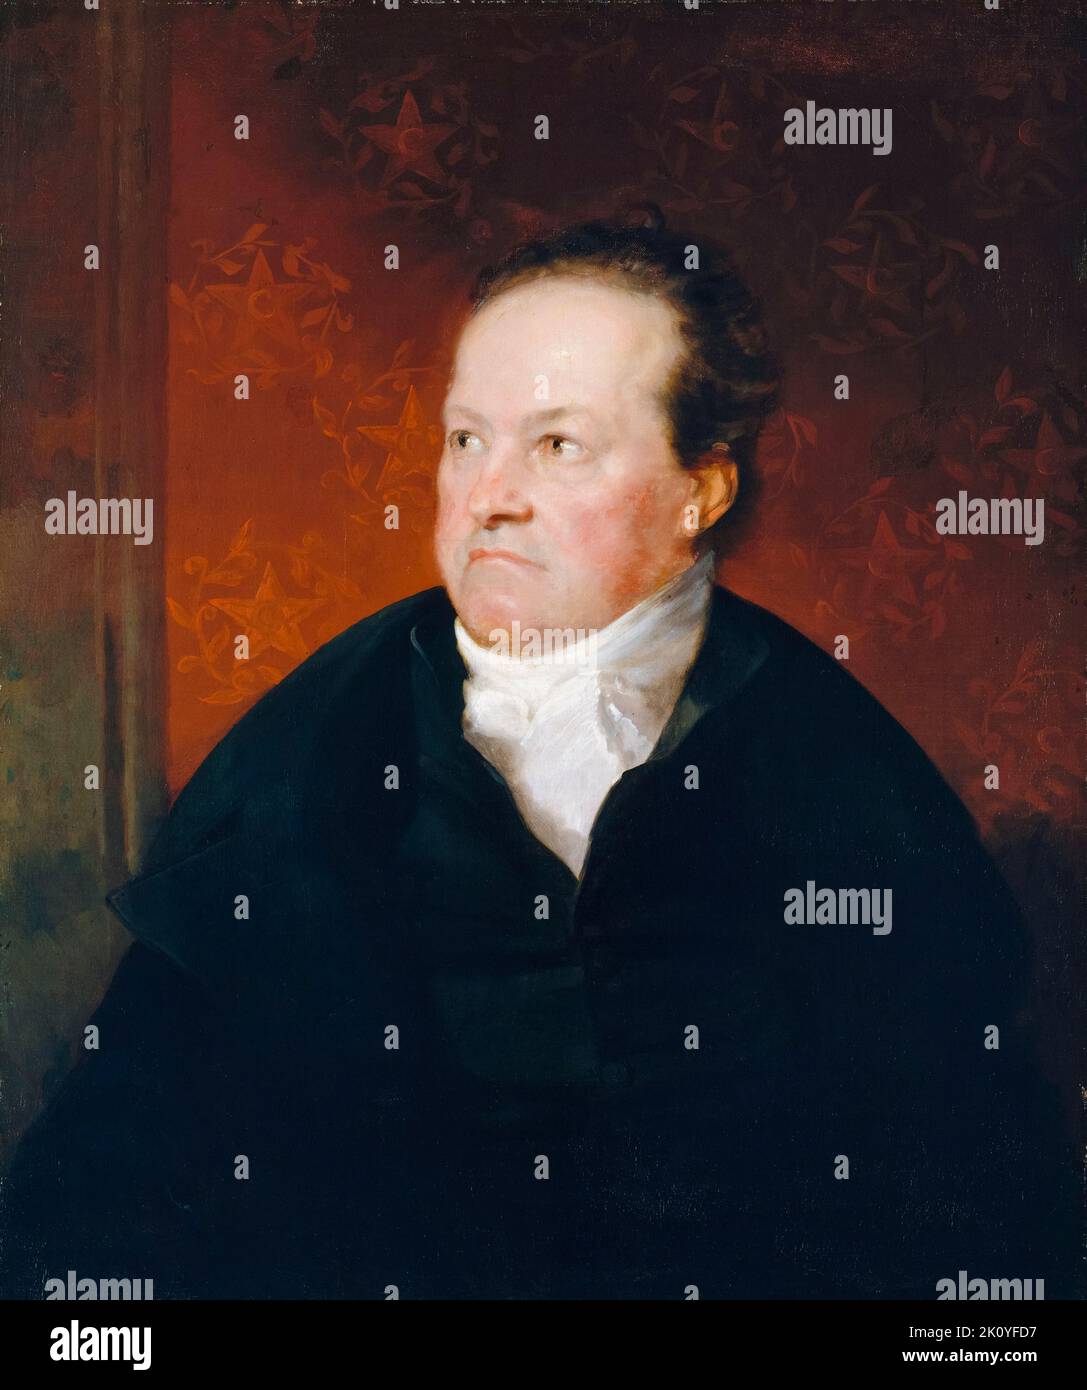 DeWitt Clinton (1769-1828), American Politician and Naturalist, portrait painting in oil on canvas by Samuel Finley Breese Morse, 1826 Stock Photo